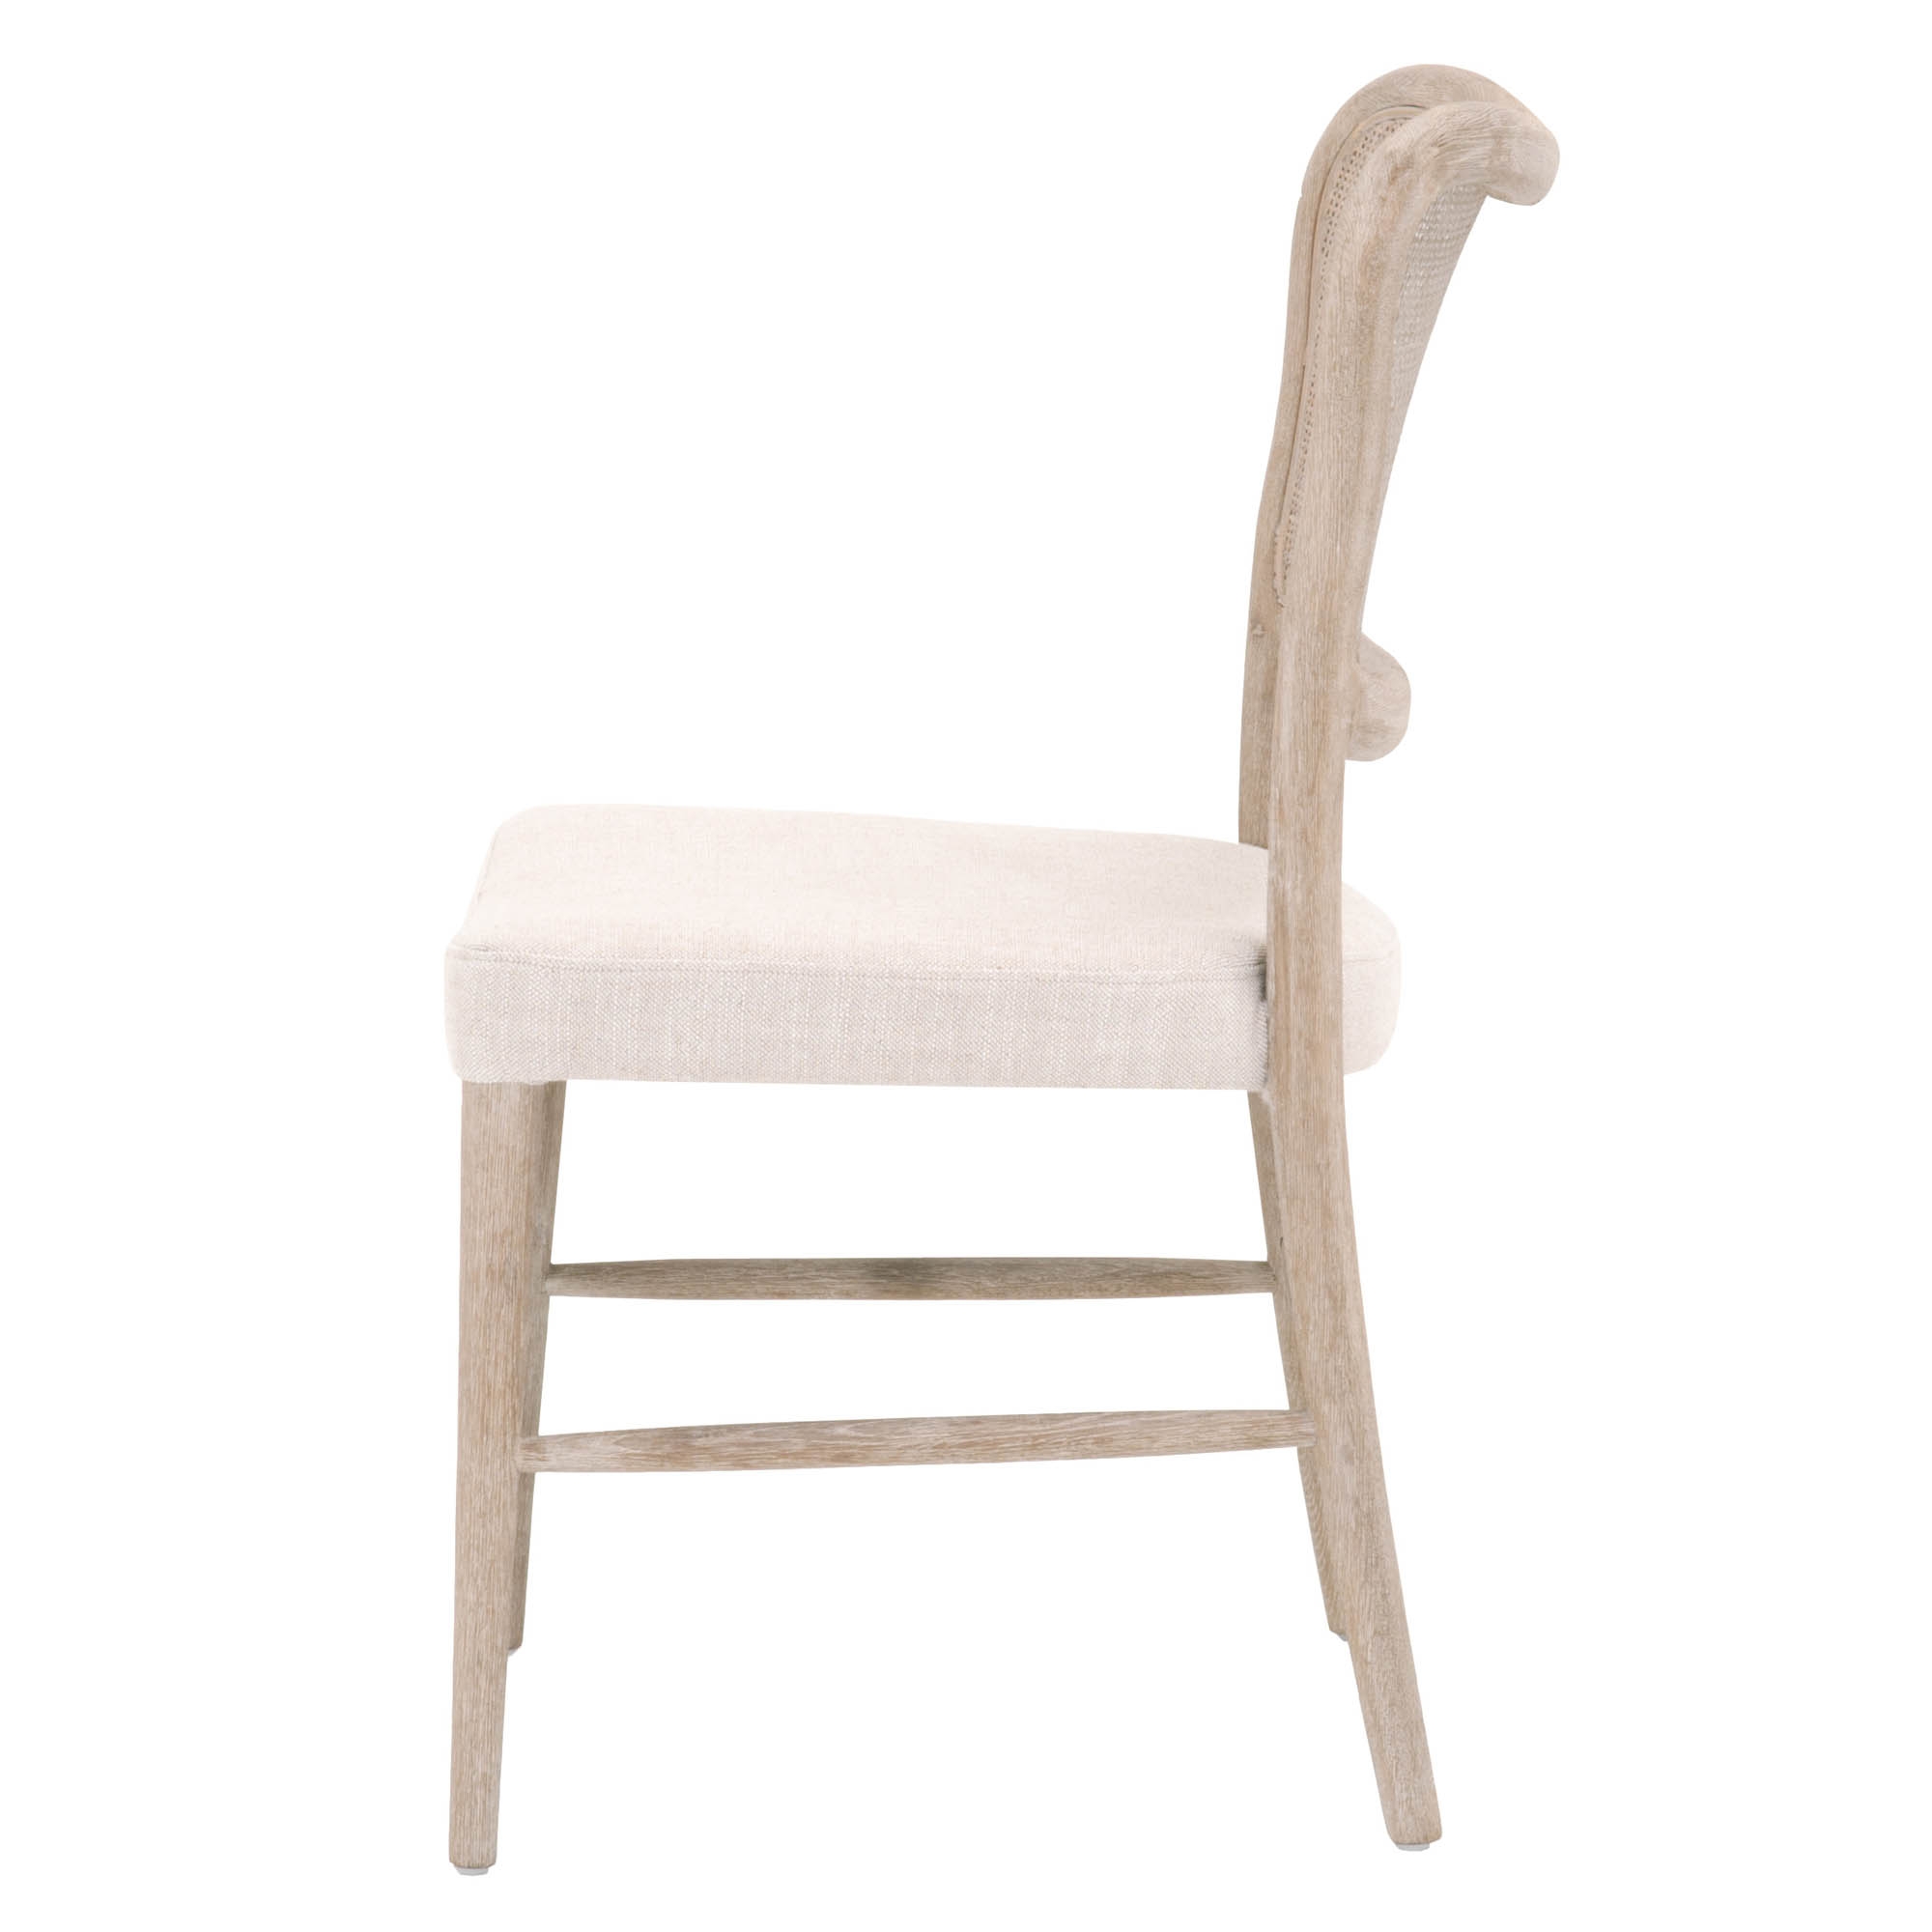 Coraline Dining Chair, Bisque, Set of 2 - Image 2